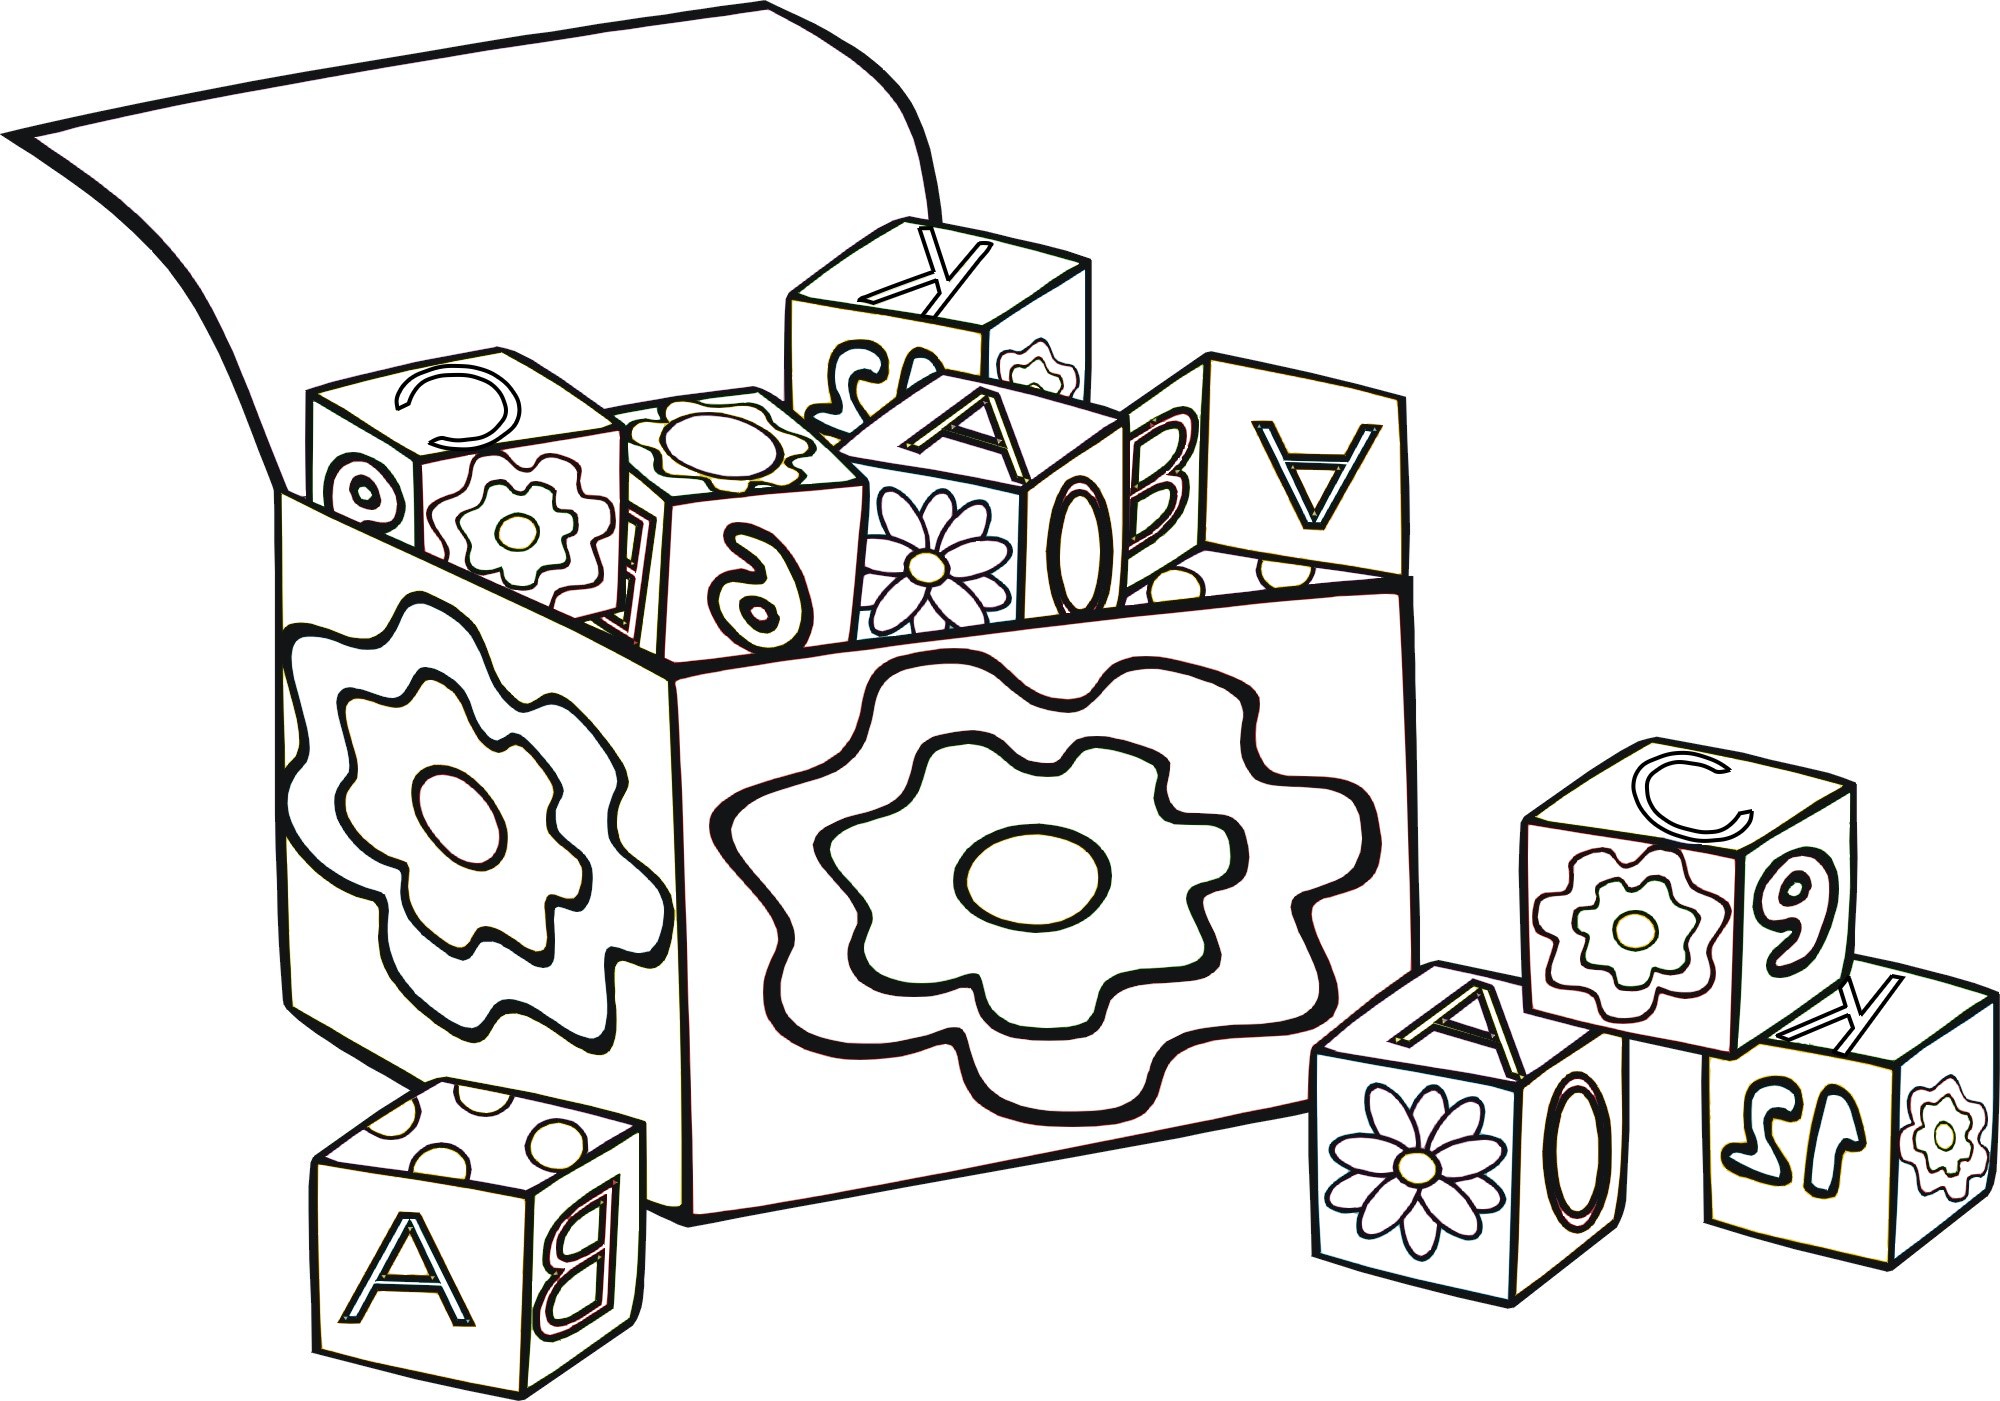 Building Blocks Coloring Pages at GetColorings.com | Free printable